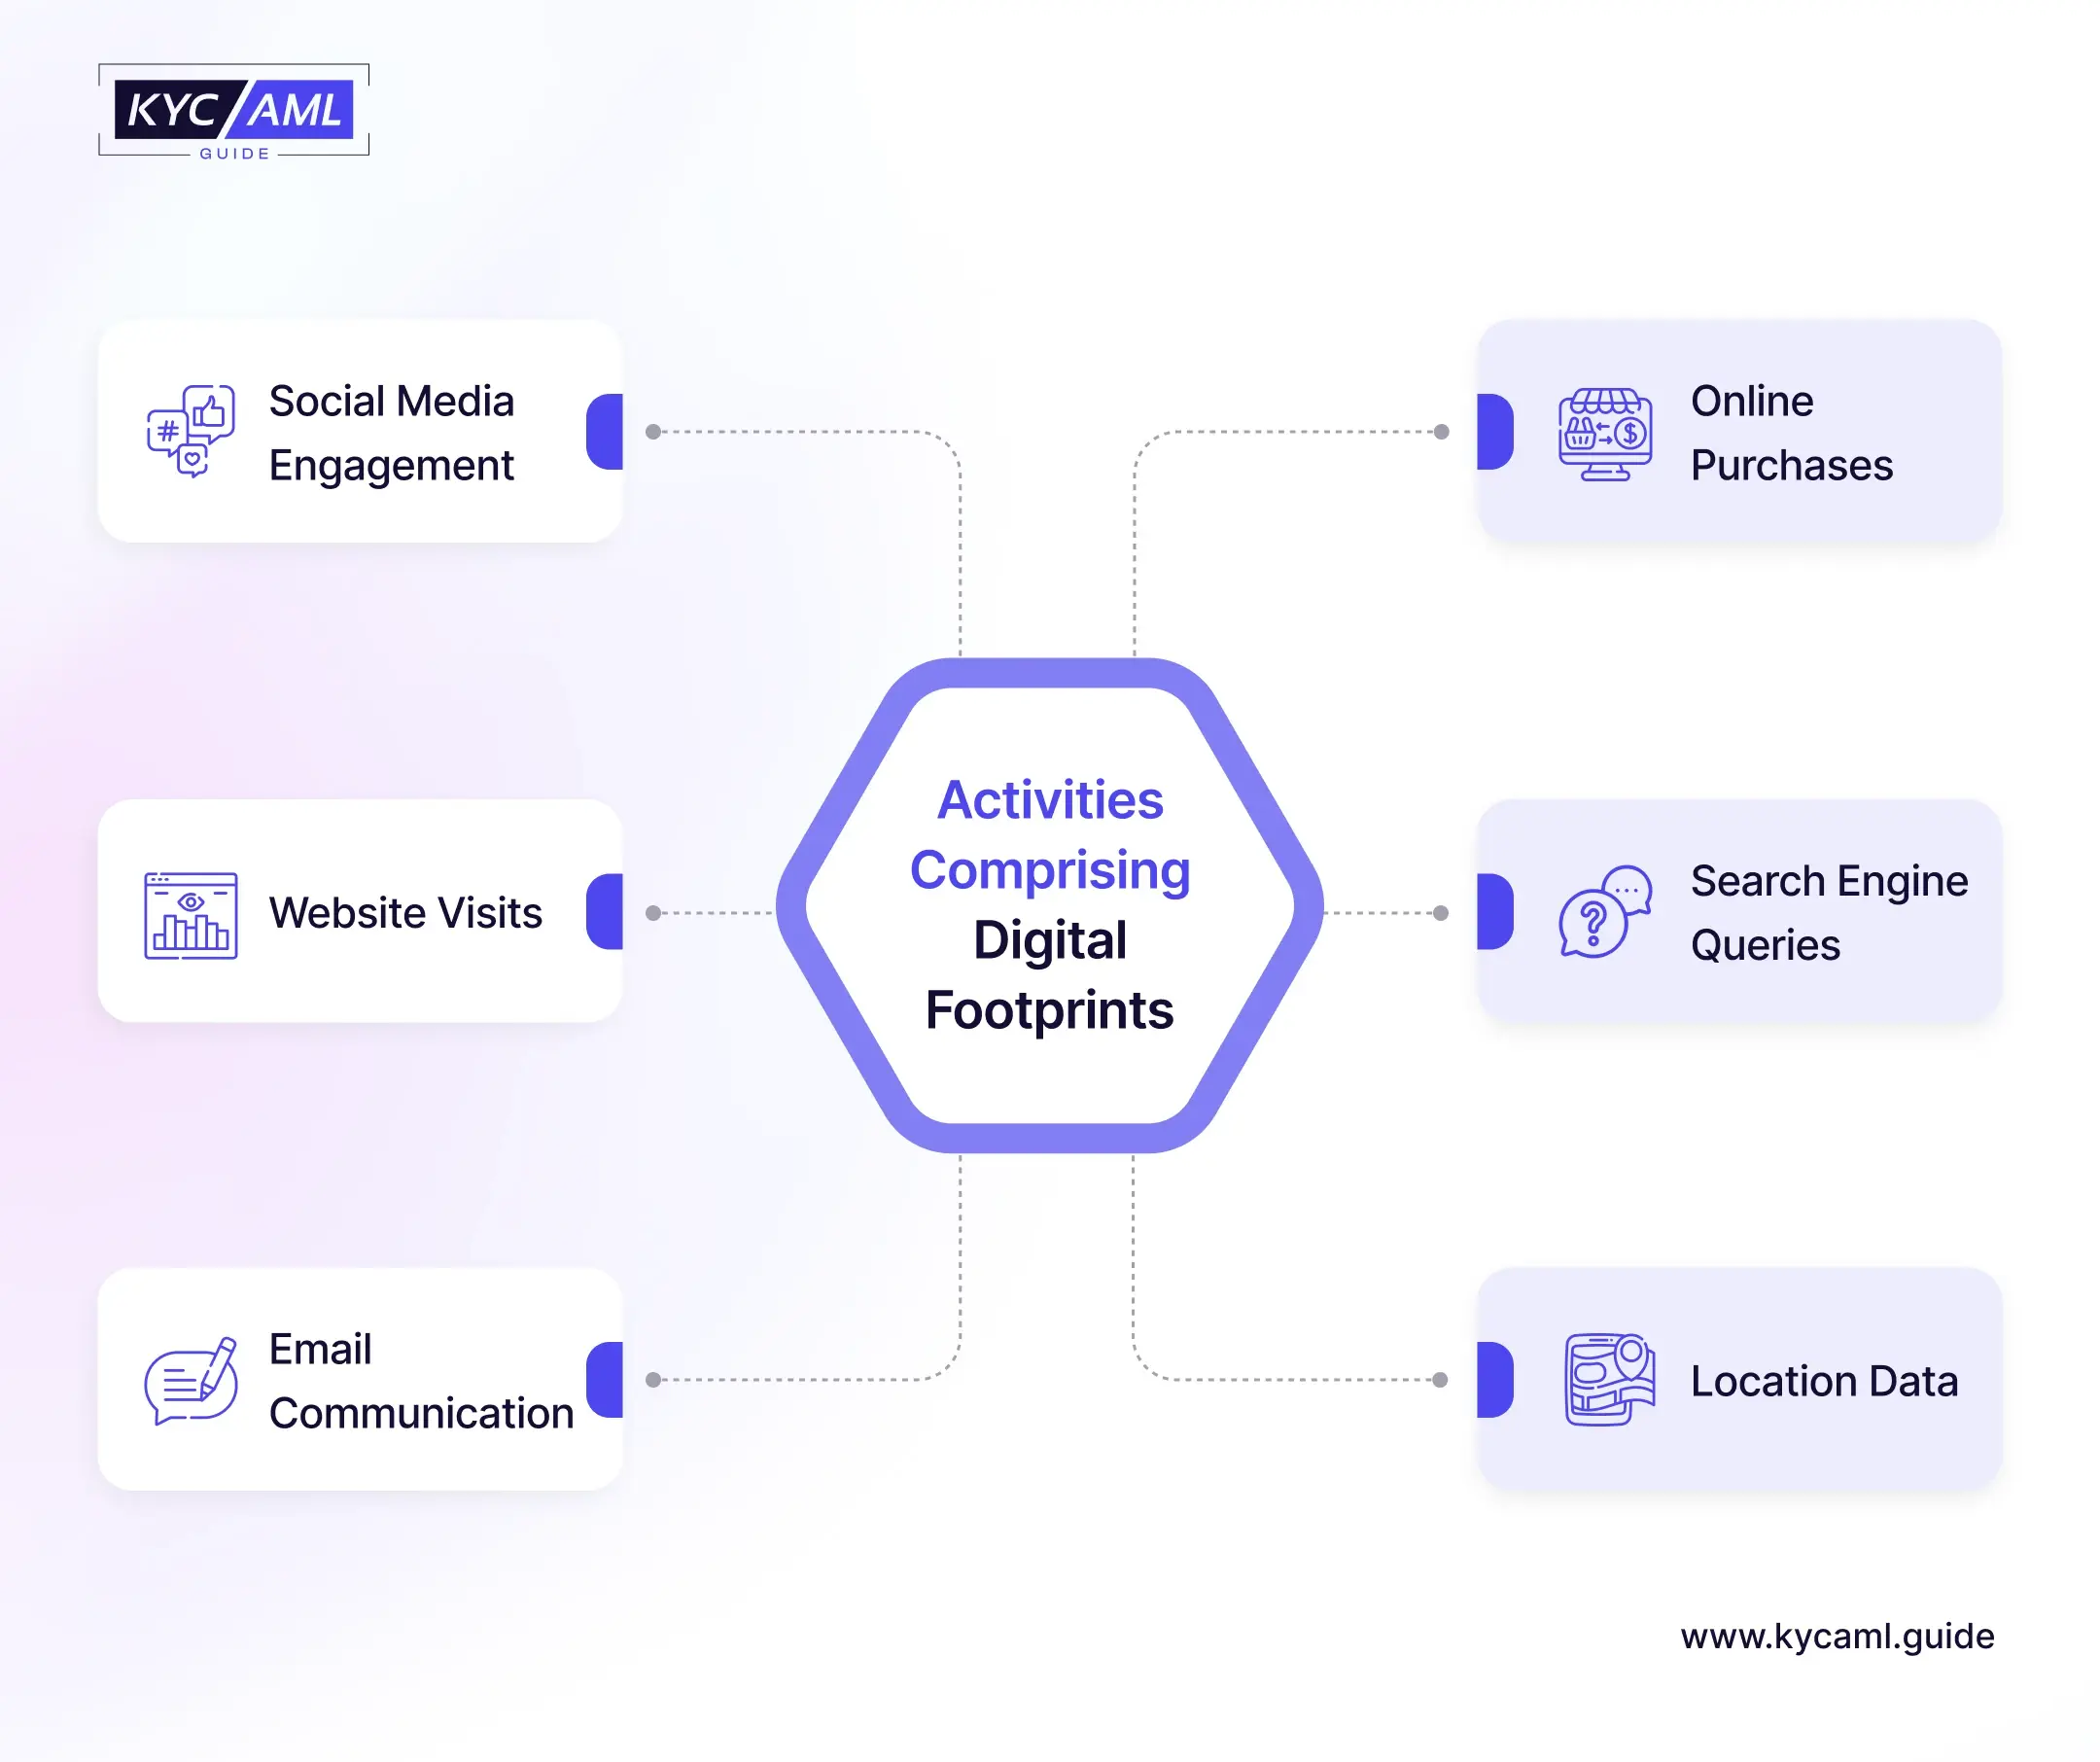 The infographic shows 6 Activities Comprising Digital Footprints: 1) Social Media Engagement 2) Online Purchases 3) Website Visits 4) Search Engine Queries 5) Email Communication 6) Location Data